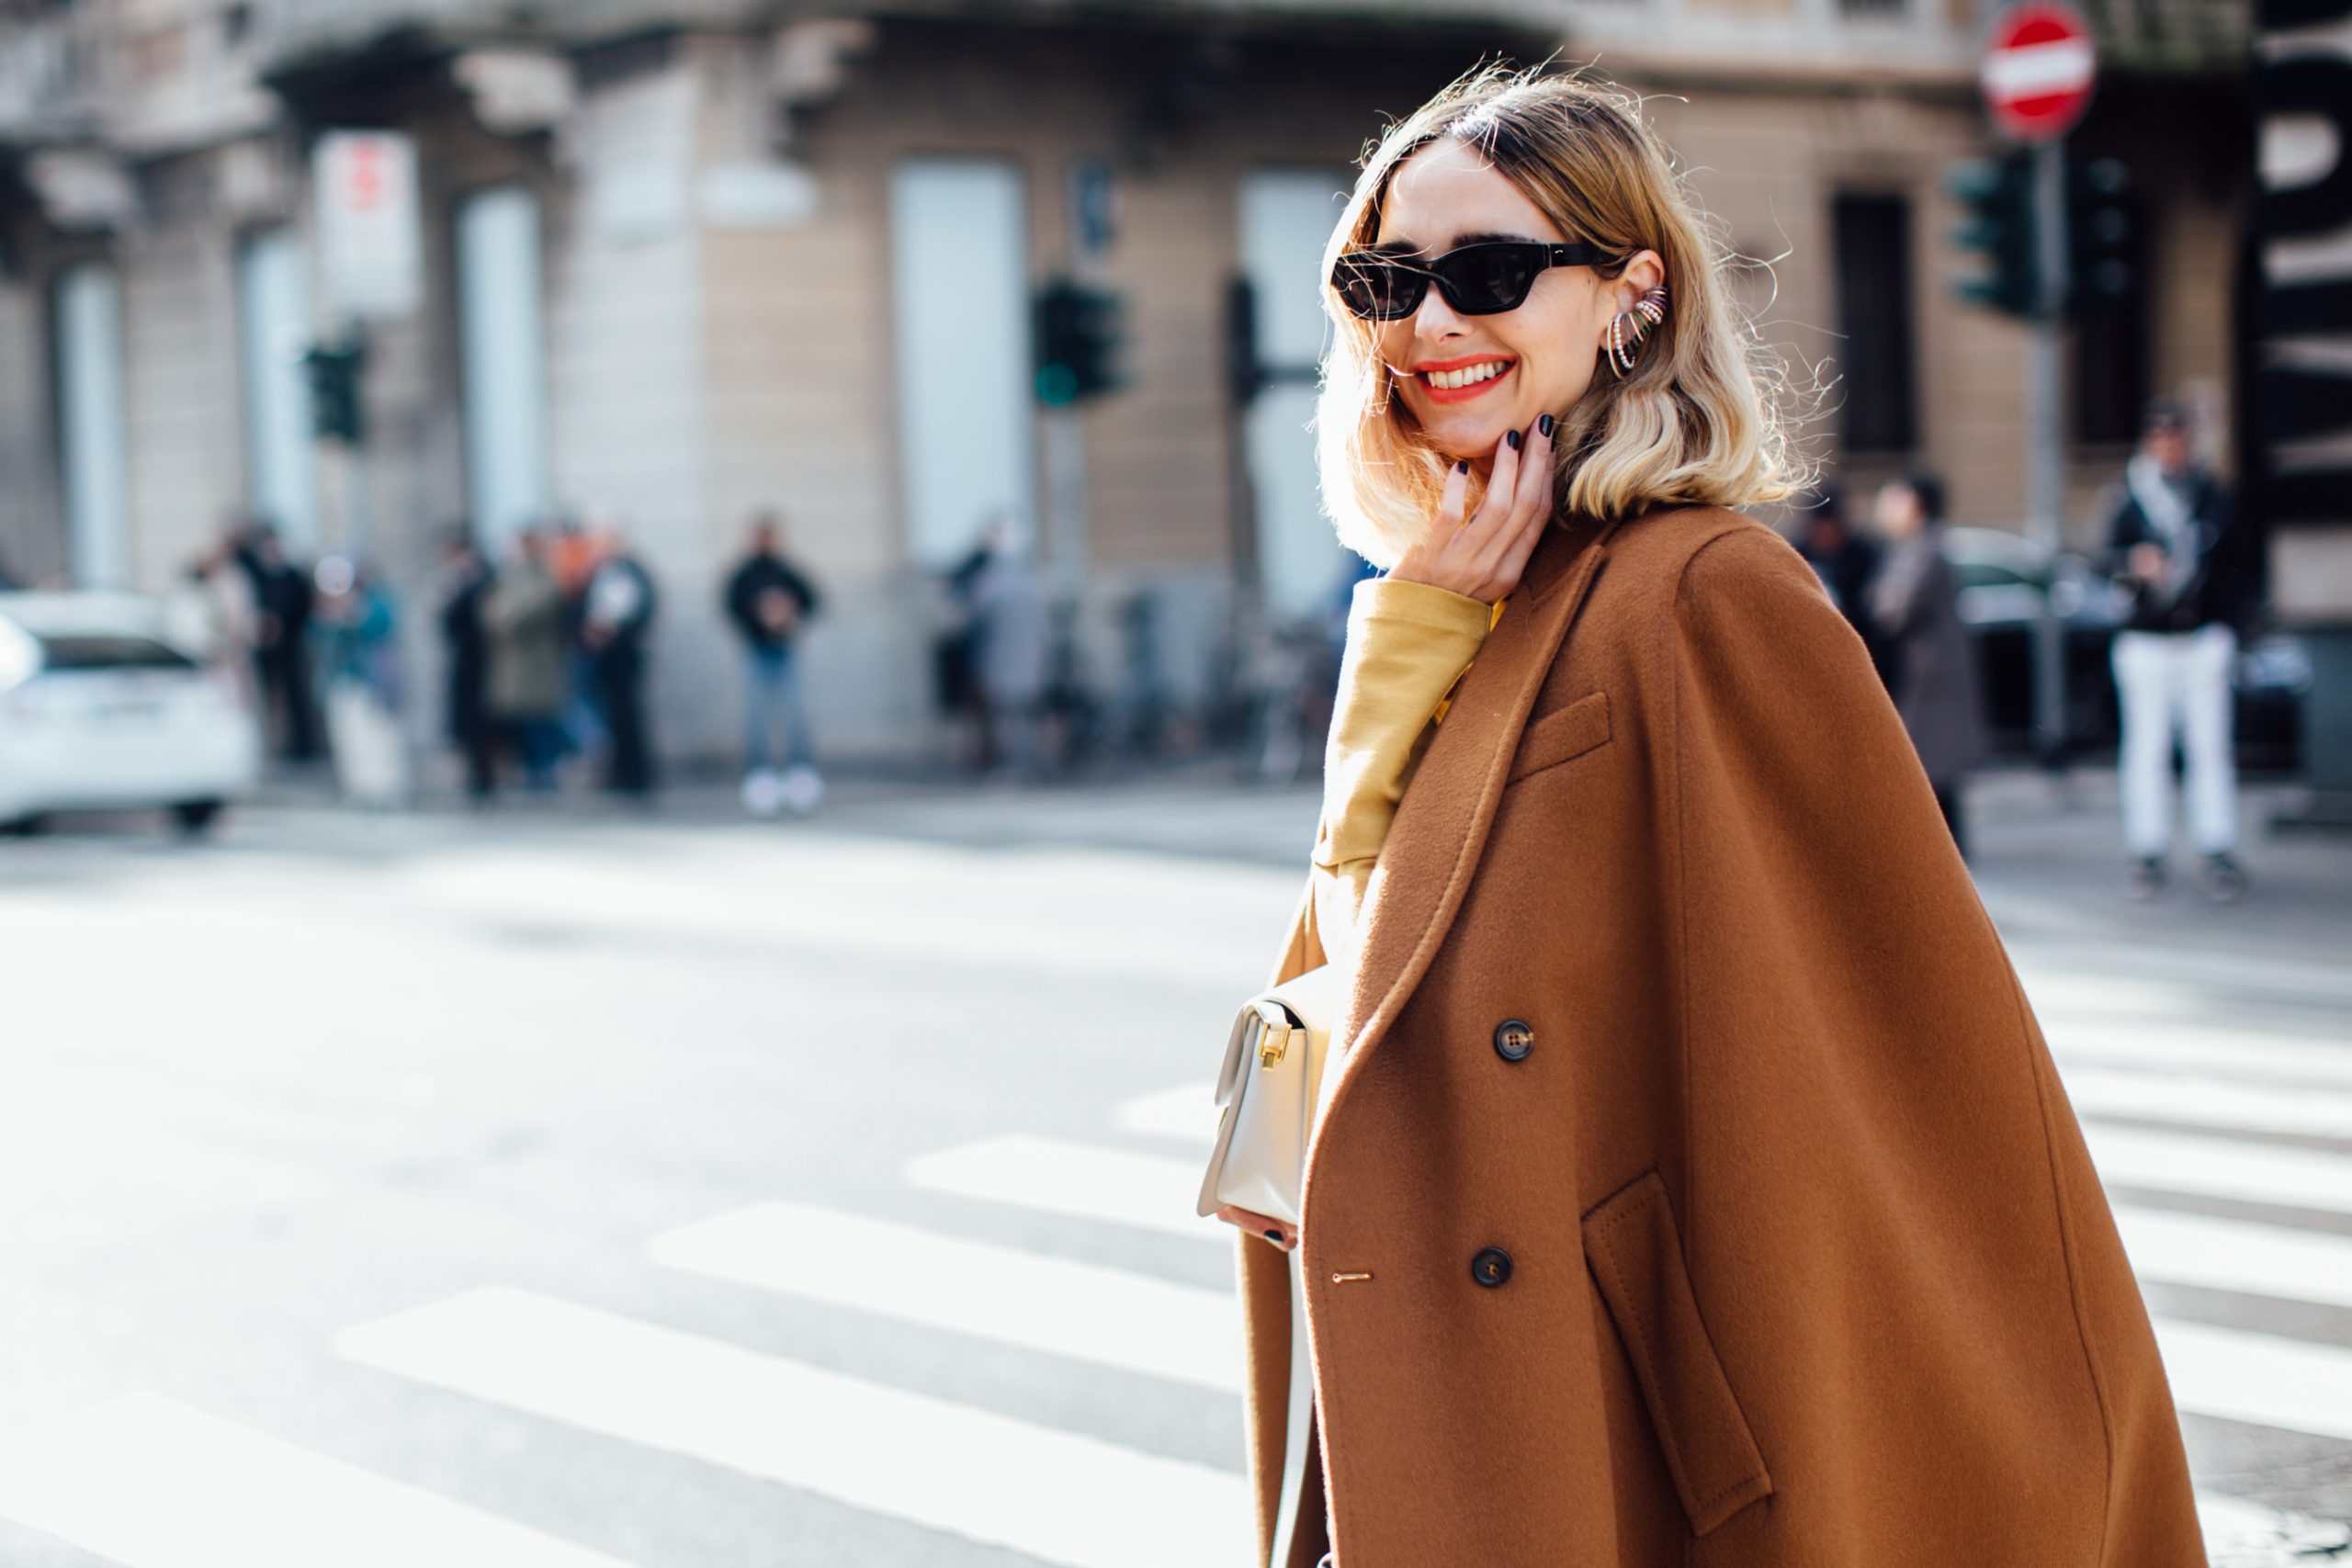 Milan Street Style Influencer Fall 2020 Looks | The Impression